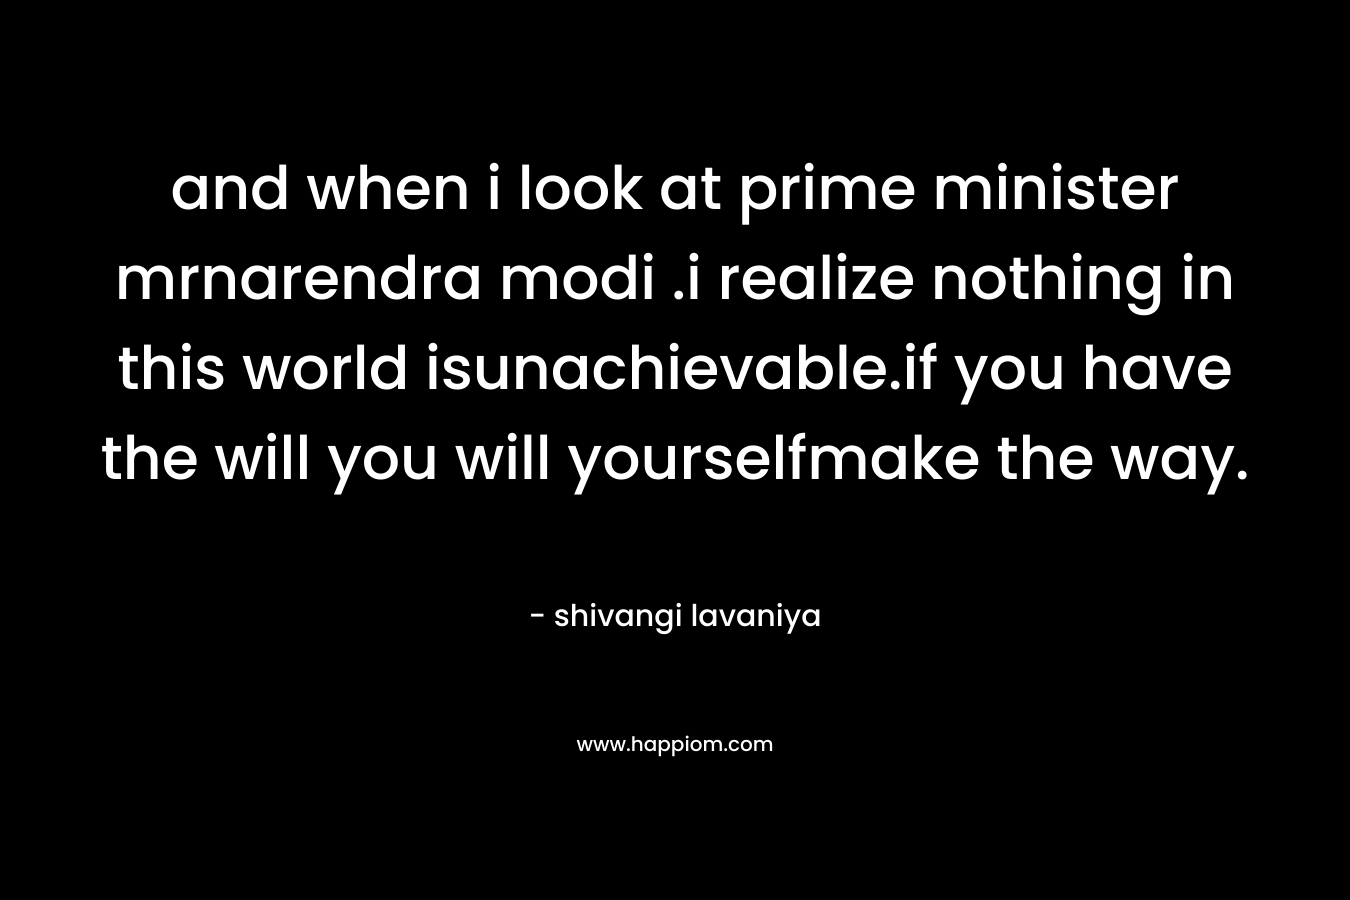 and when i look at prime minister mrnarendra modi .i realize nothing in this world isunachievable.if you have the will you will yourselfmake the way. – shivangi lavaniya